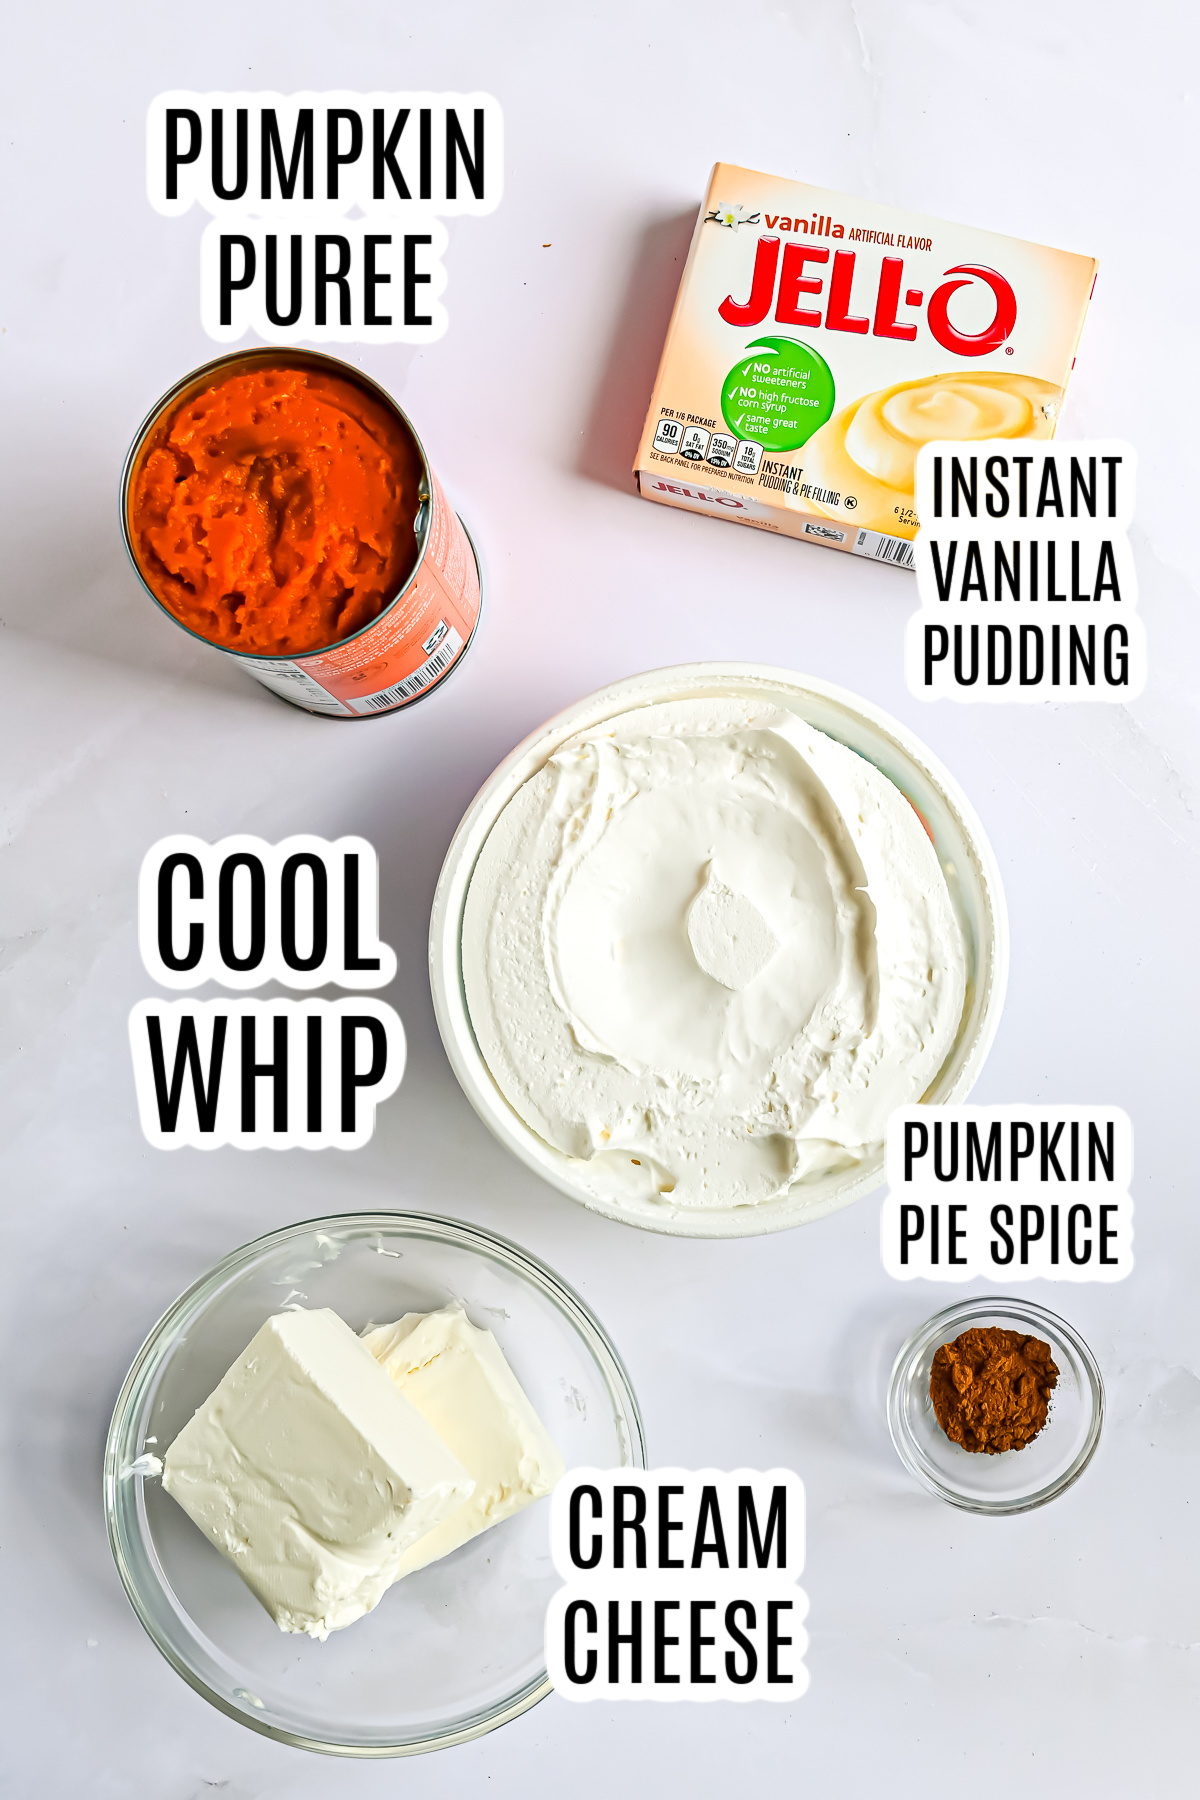 The ingredients needed for how to make pumpkin fluff include pumpkin puree, instant vanilla pudding, cool whip, pumpkin pie spice and cream cheese.